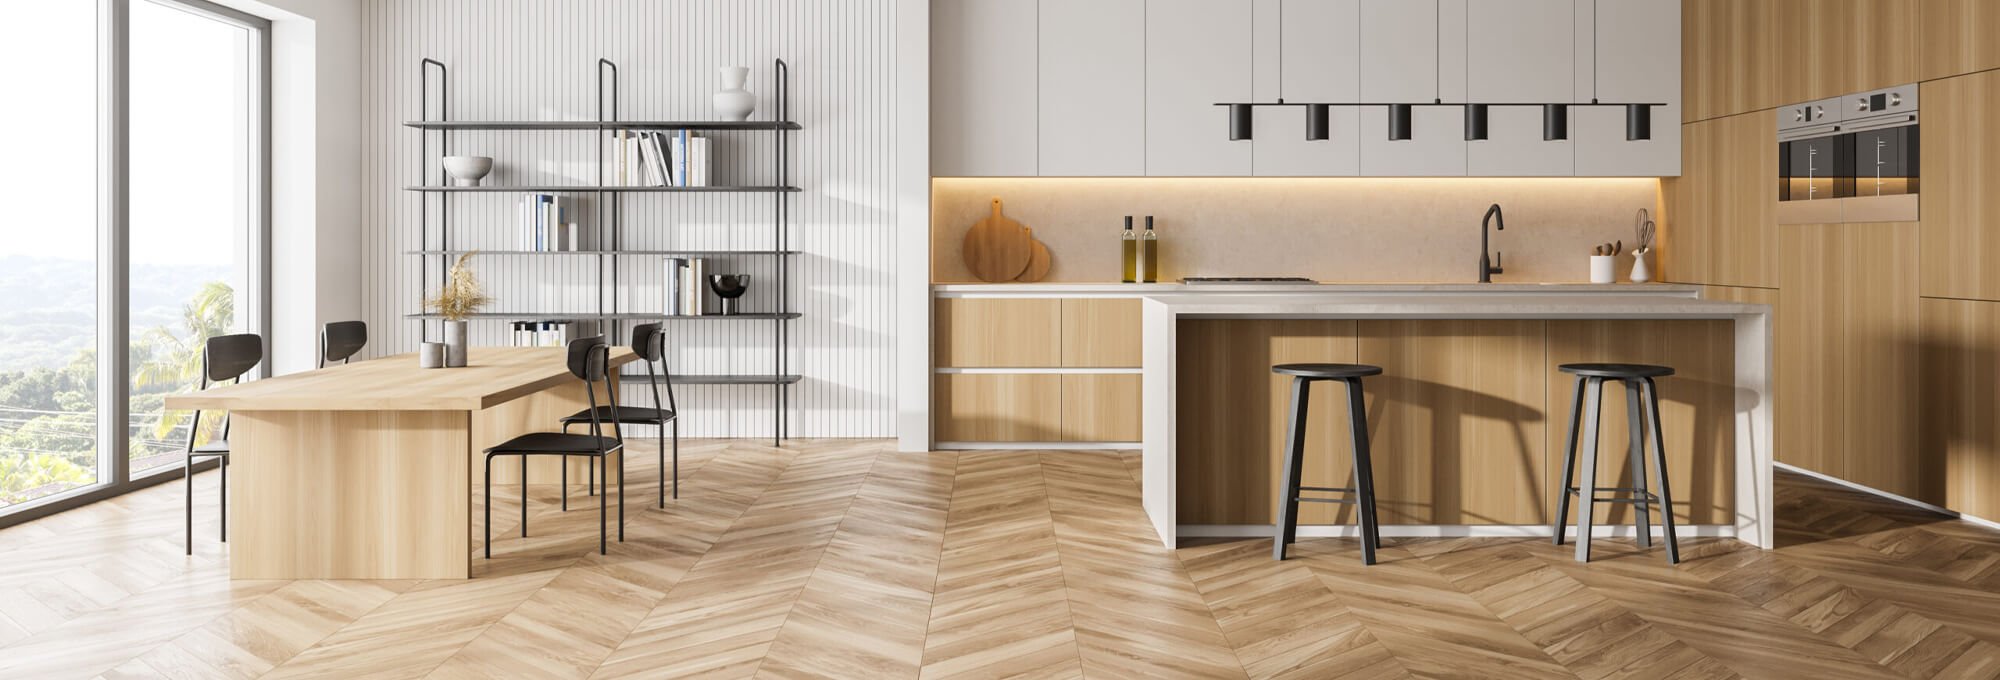 Shop Flooring Products from Pride Flooring and Home Decor in Miami